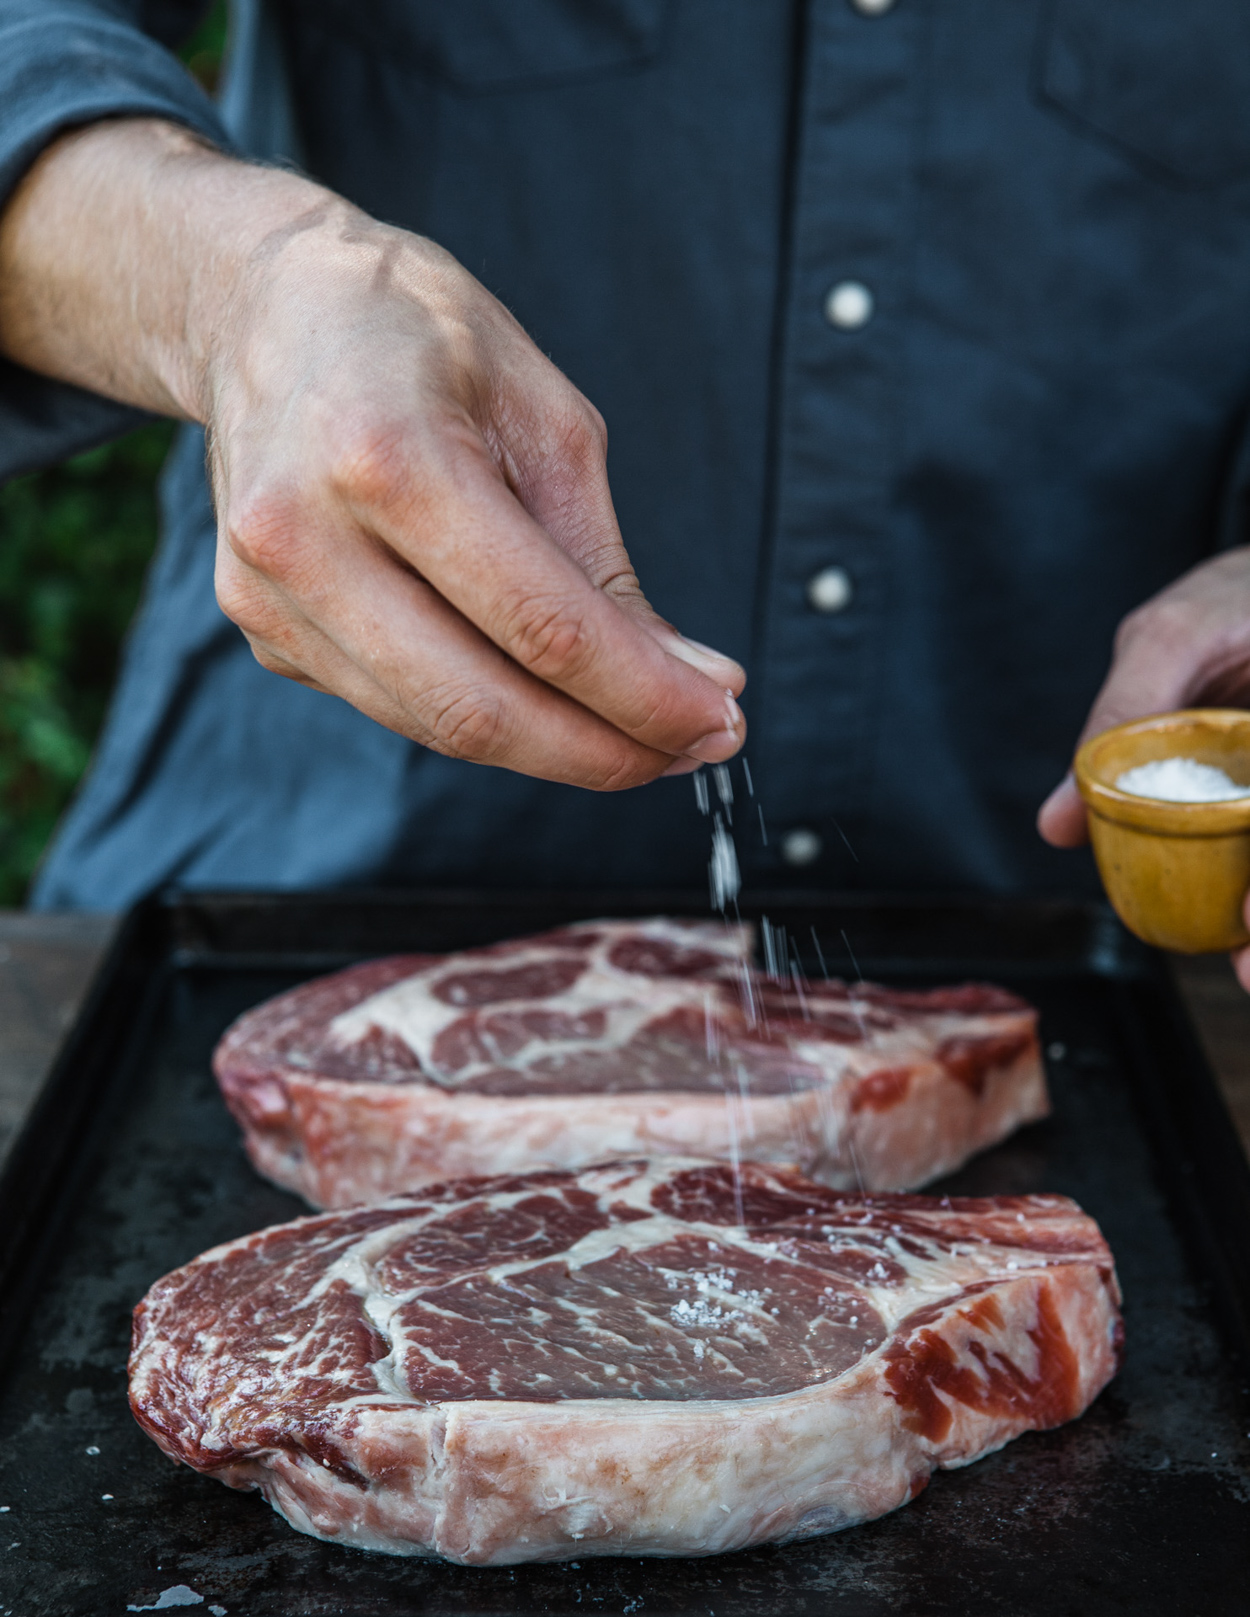 Los Angeles Food photographer - Grill Master Cookbook Salting Steaks  by Ray Kachatorian